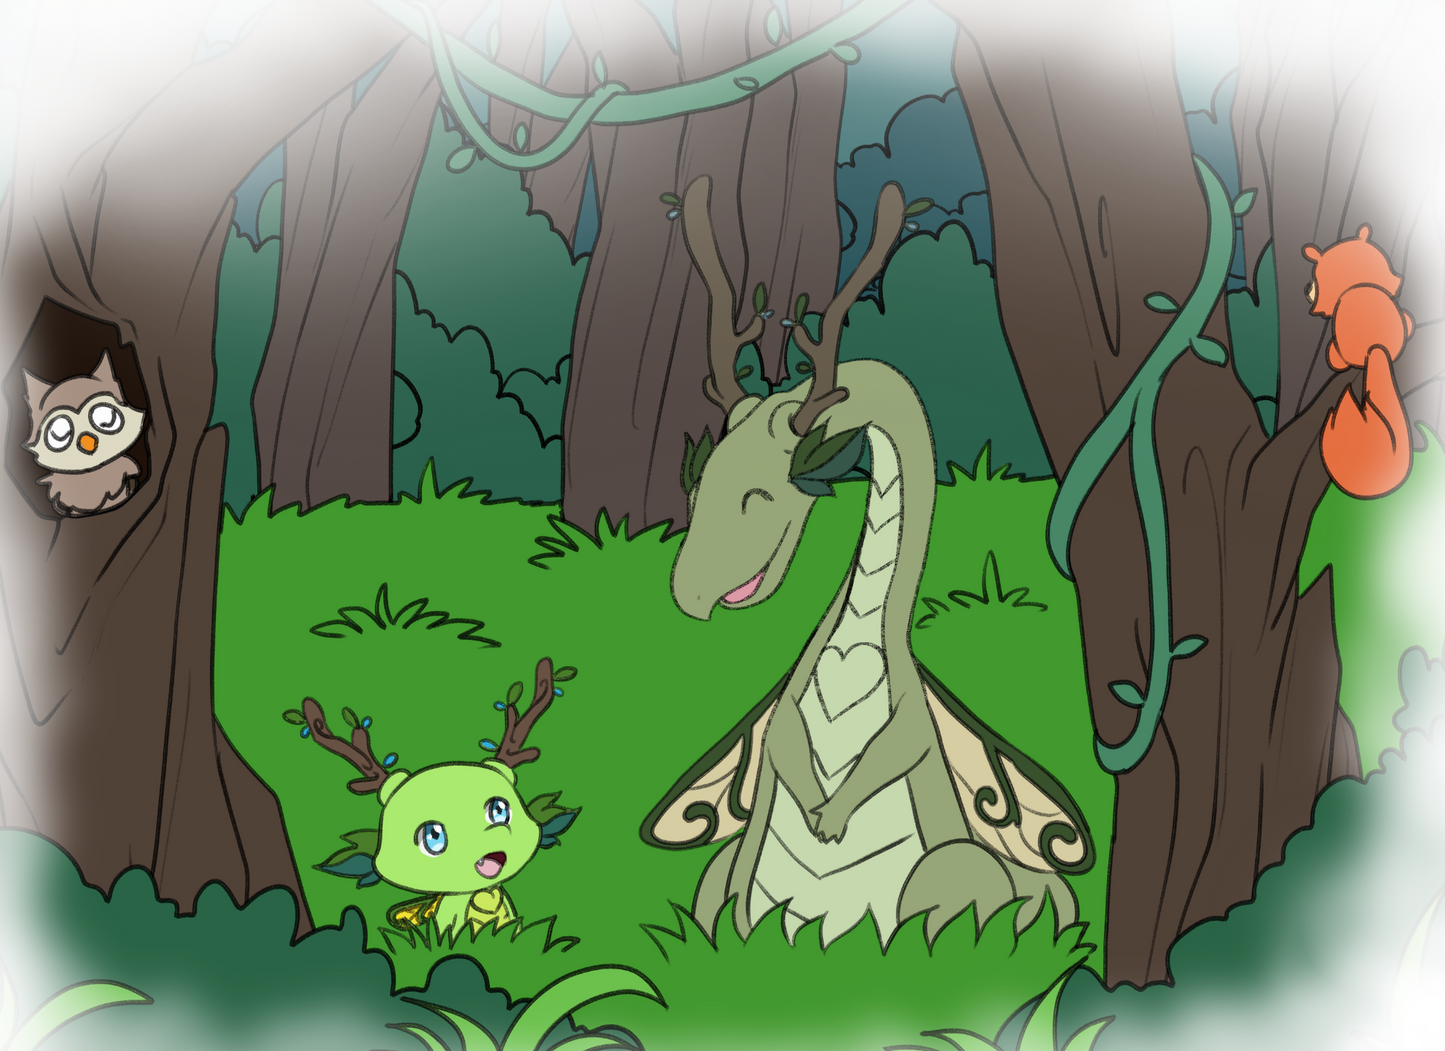 The Tiny Leaf Dragon Adventure (New Friendship Found in the Forest)